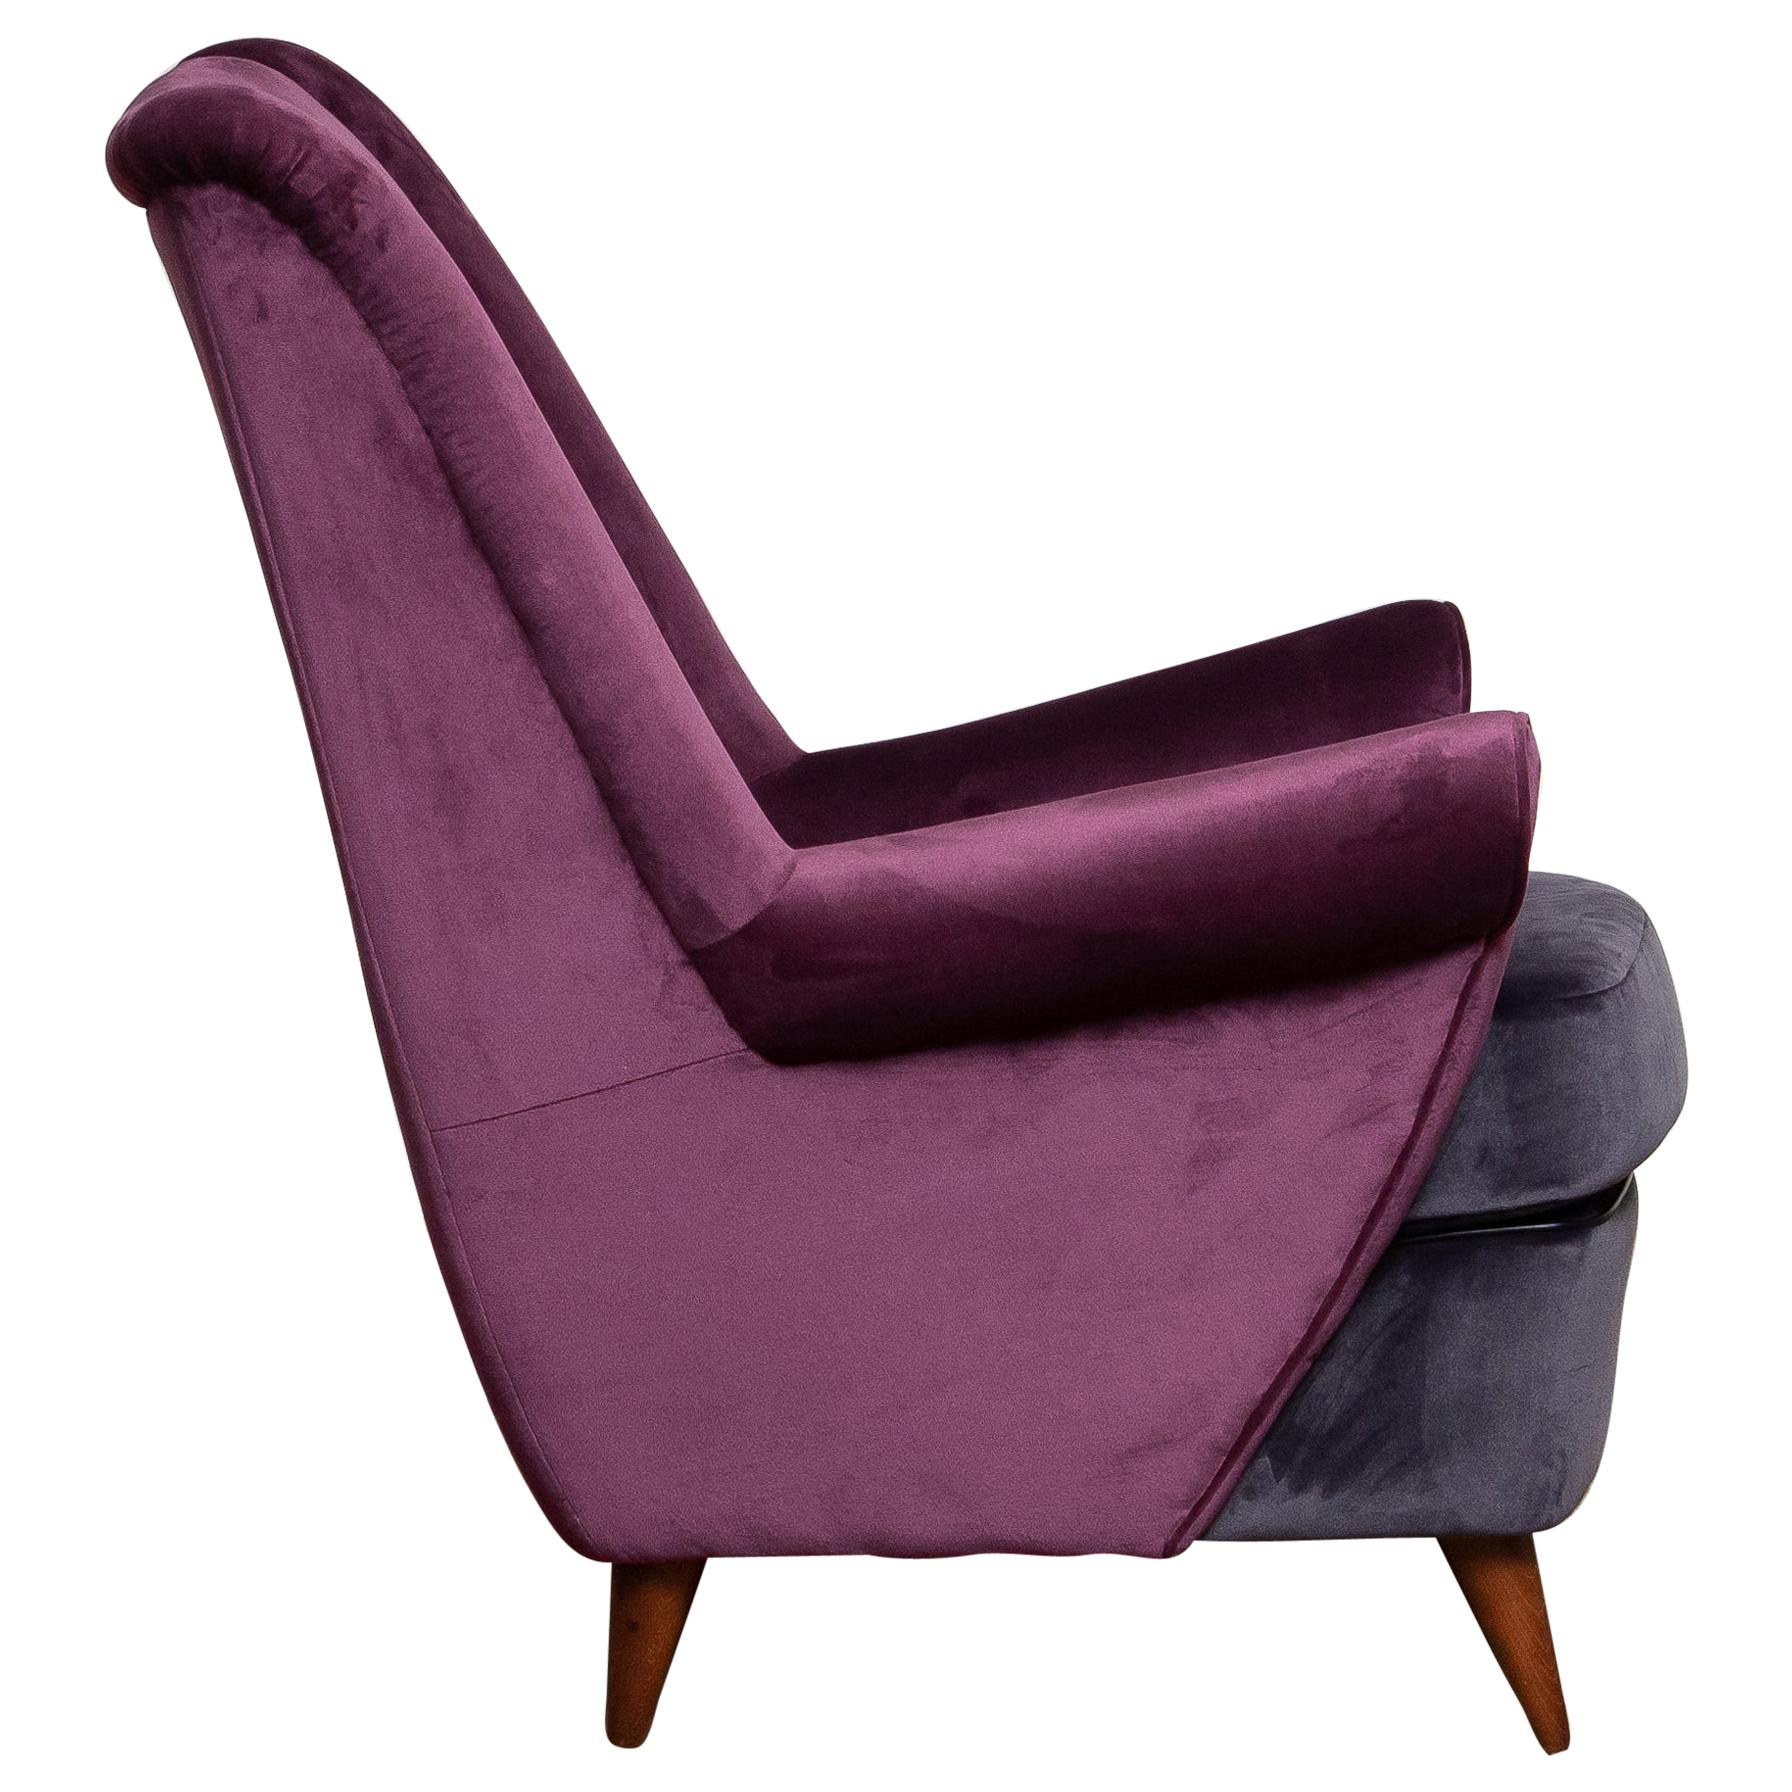 Absolutely beautiful 1950s lounge or easy chair designed by Gio Ponti and made by ISA in Bergamo in Italy. The fabulous color combination and choice of fabric, magenta and dark gray, makes this chair a real eye catcher. This chairs are completely